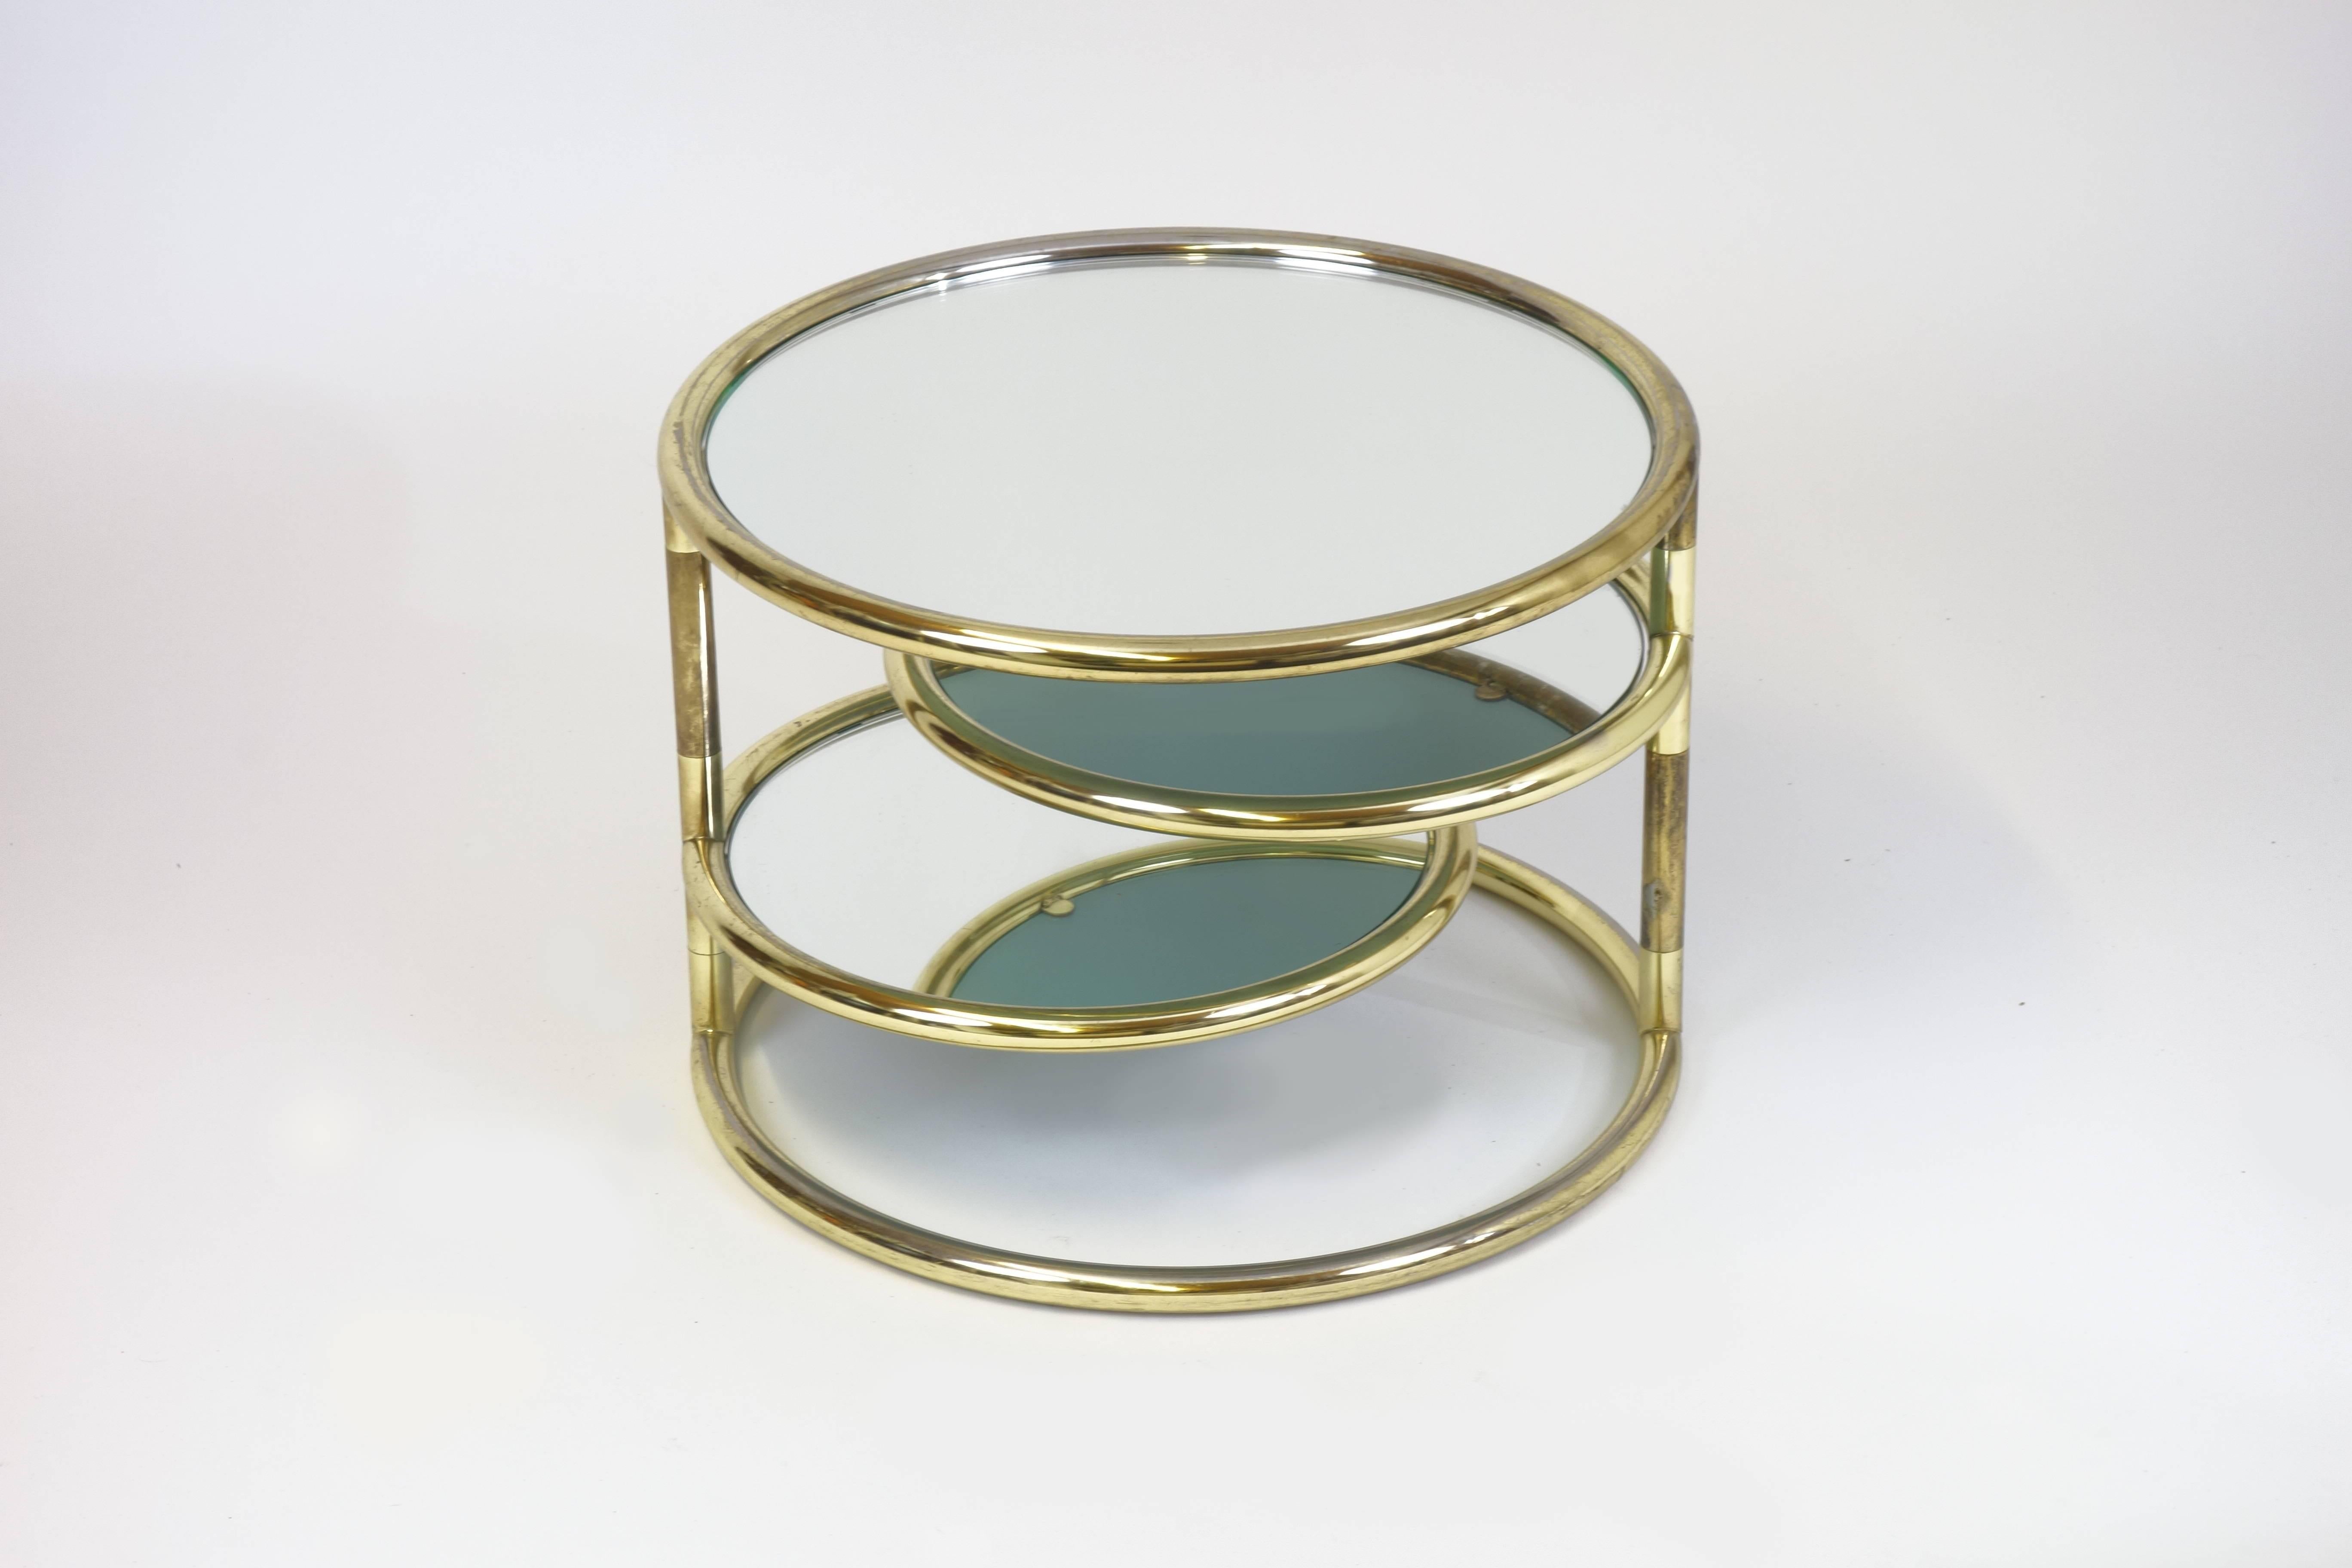 Sidetable made of gilded tubular frame with adjustable mirrored tops.